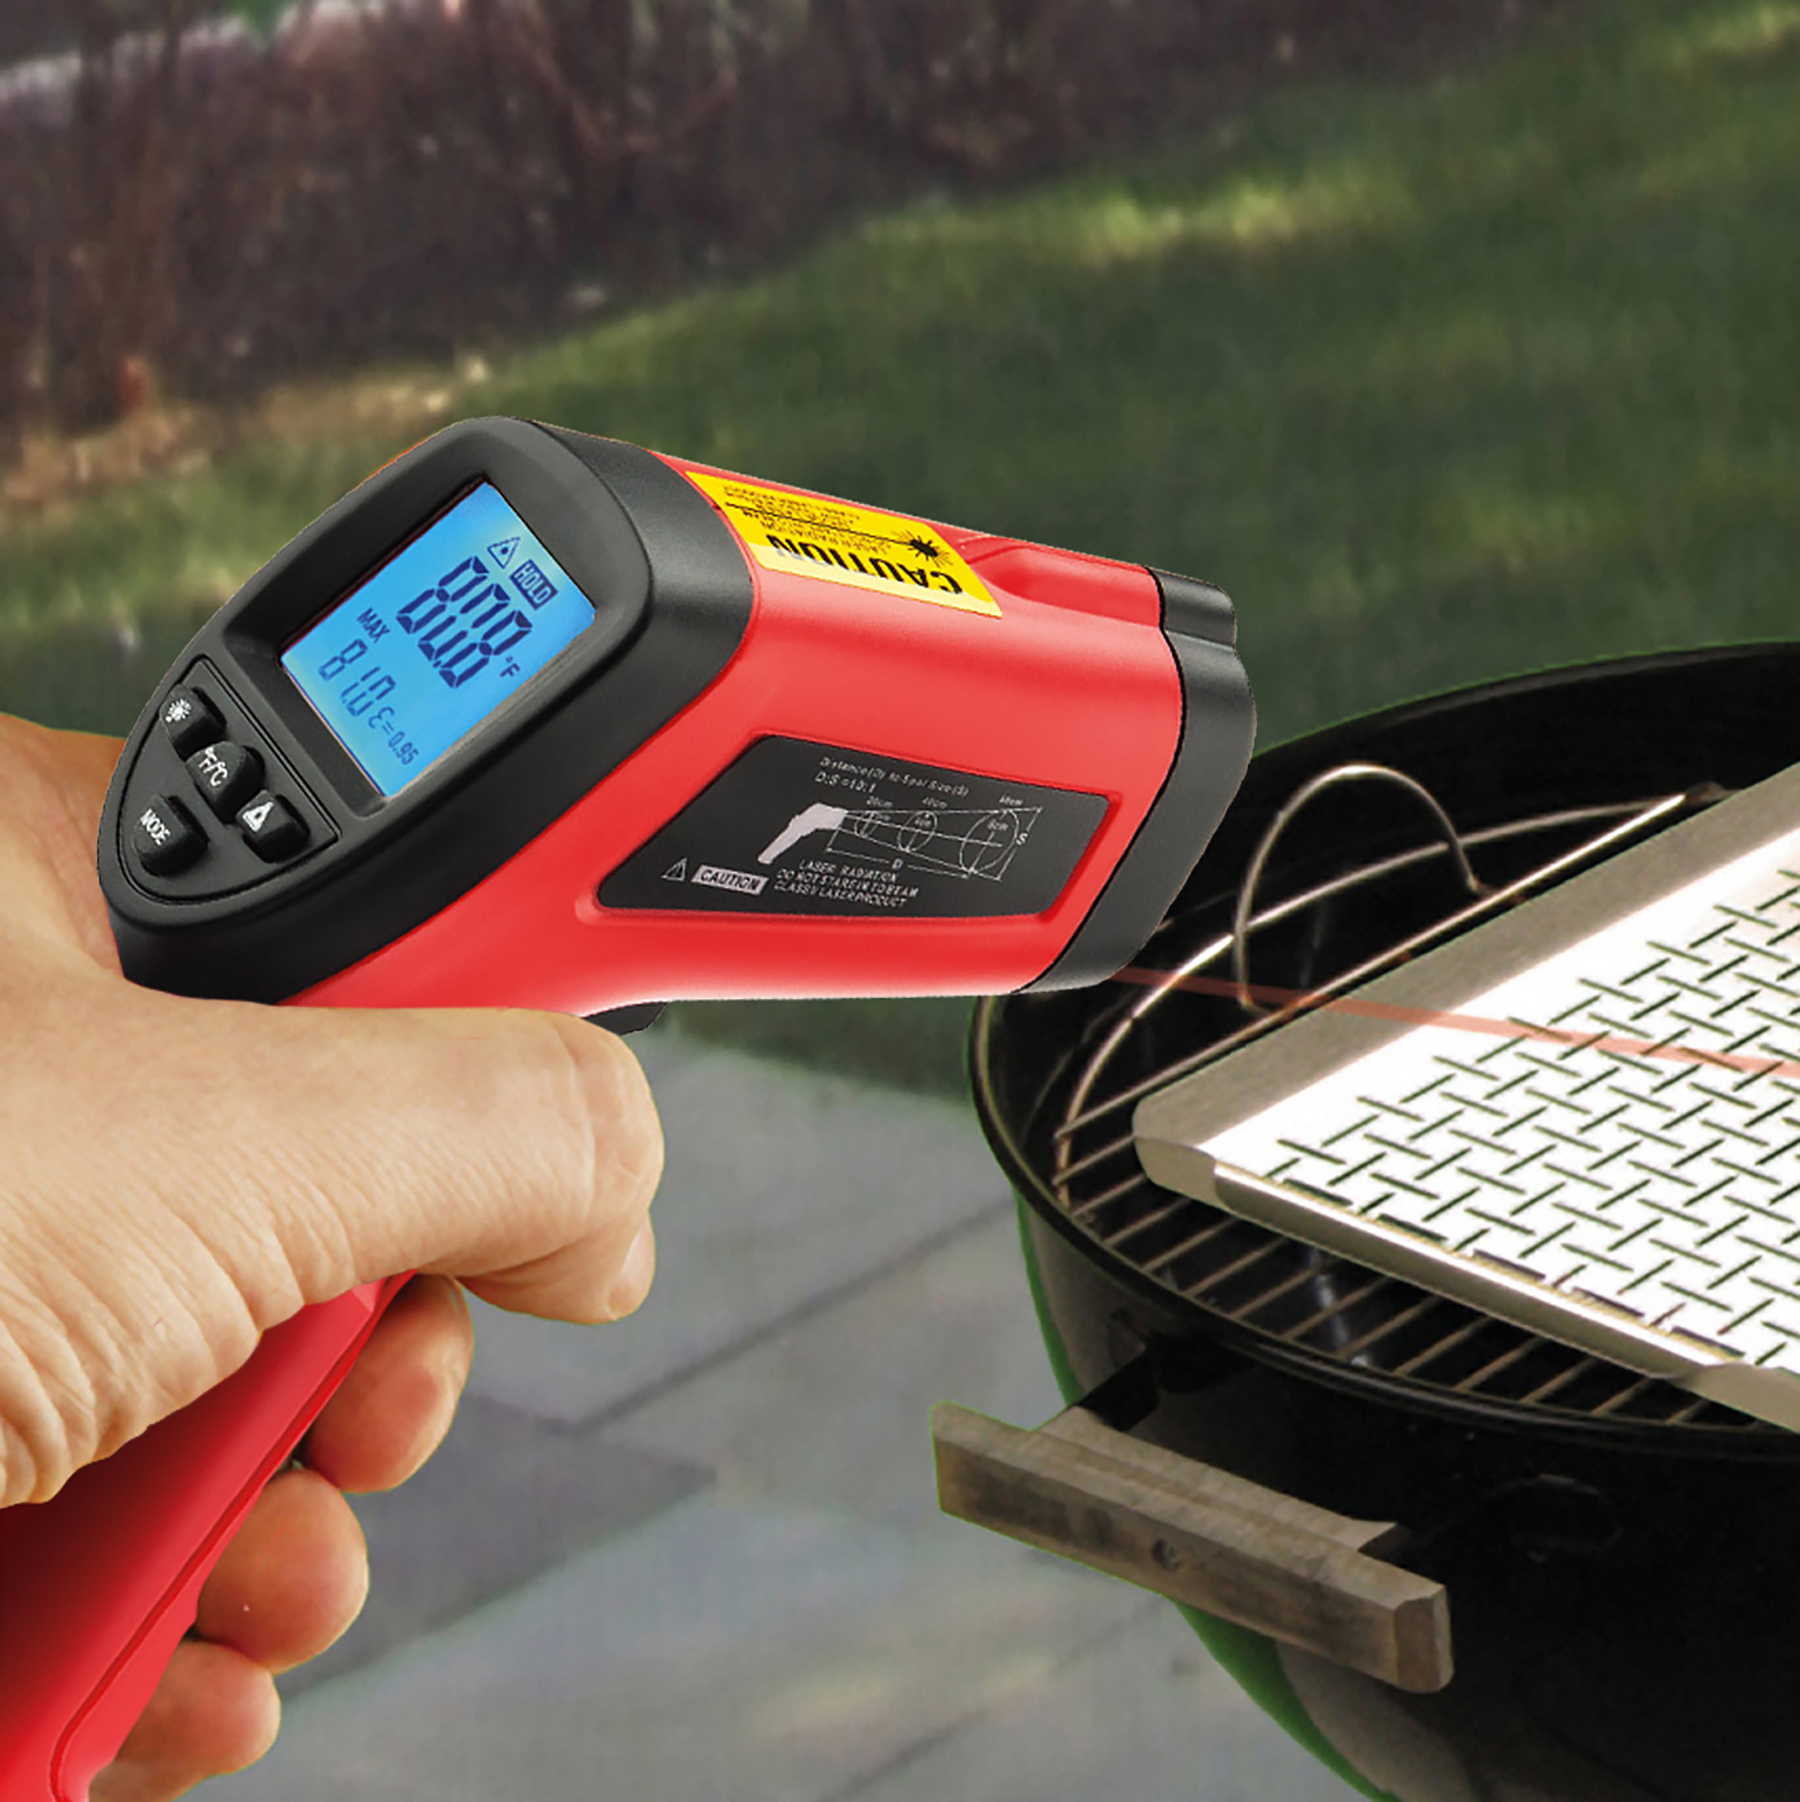 Extra Large Grill Surface Thermometer